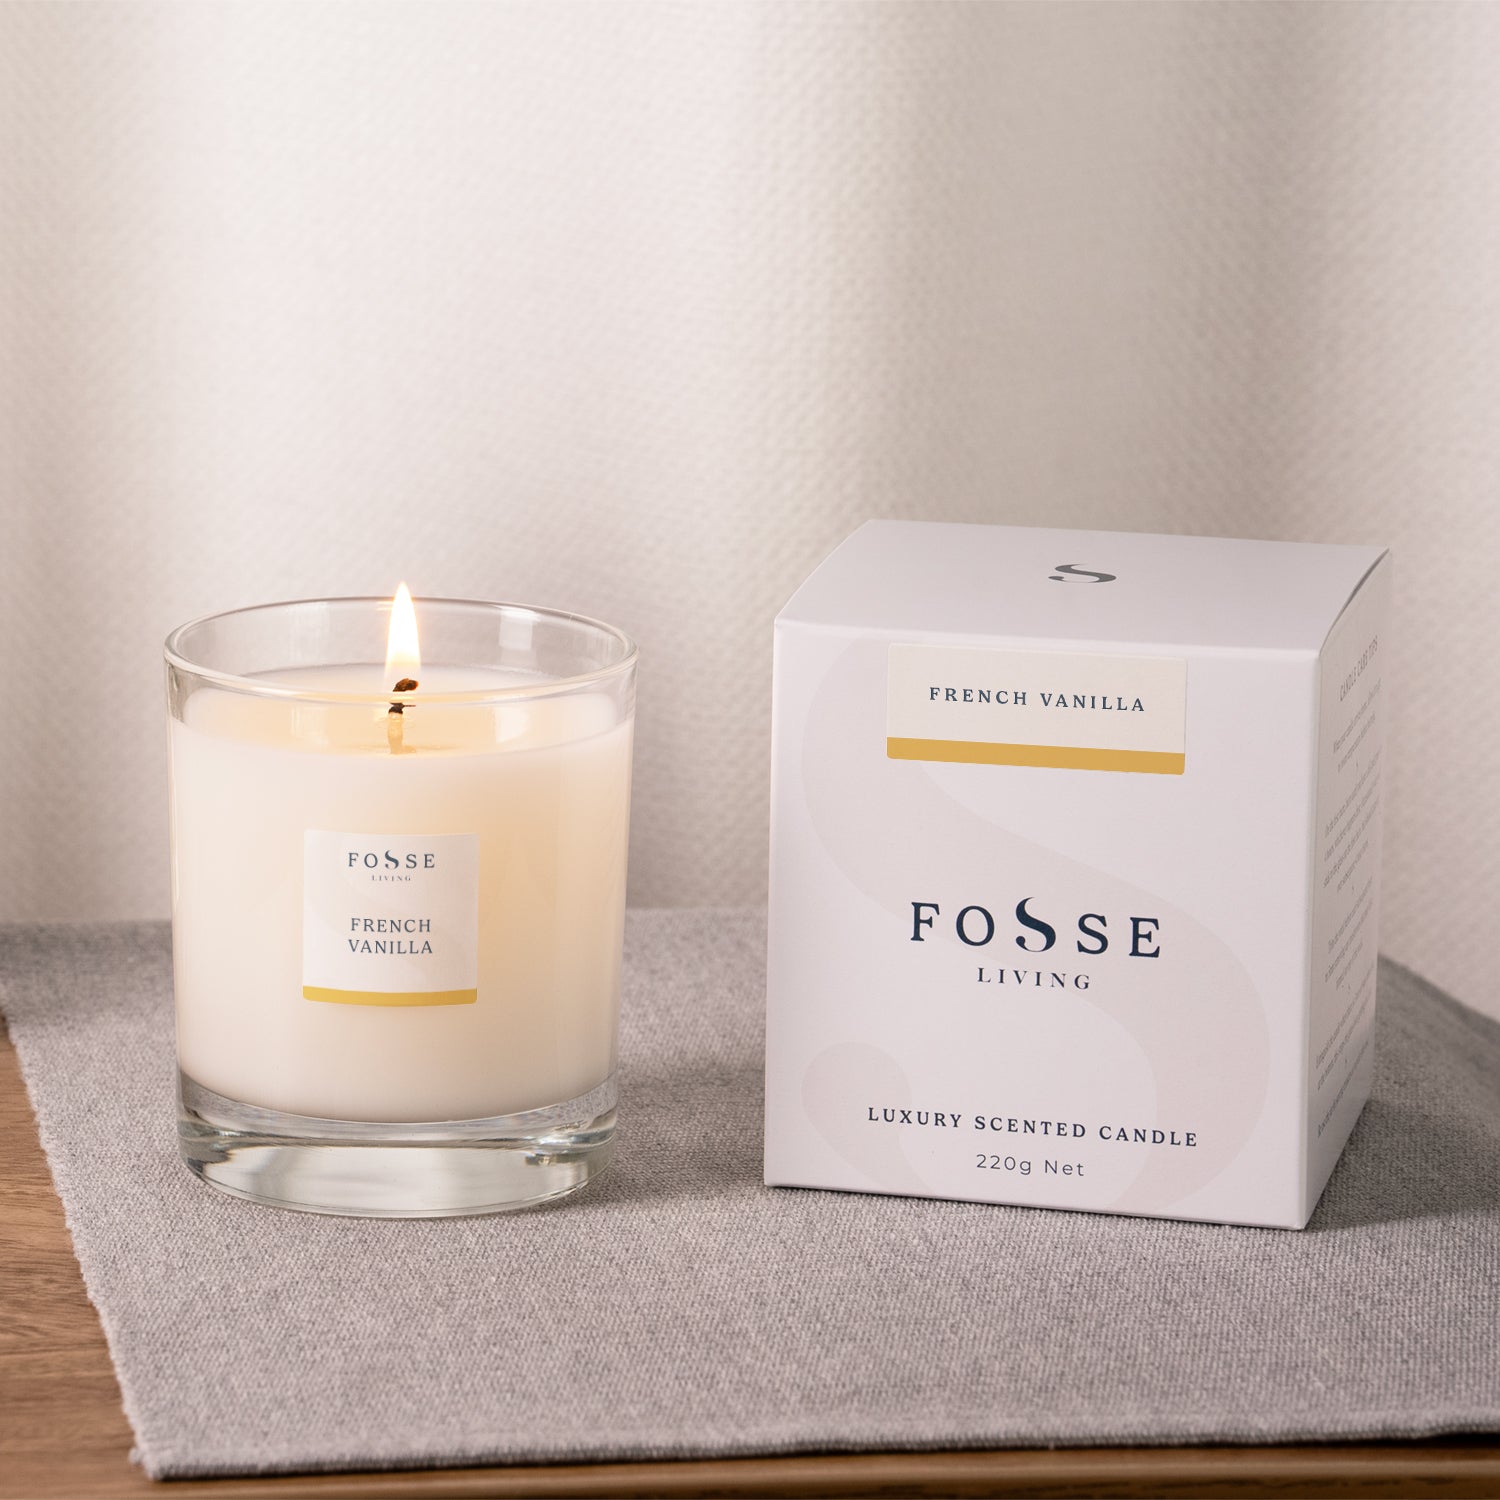 French Vanilla Scented Candle - Fosse Living | Luxury Home Fragrances